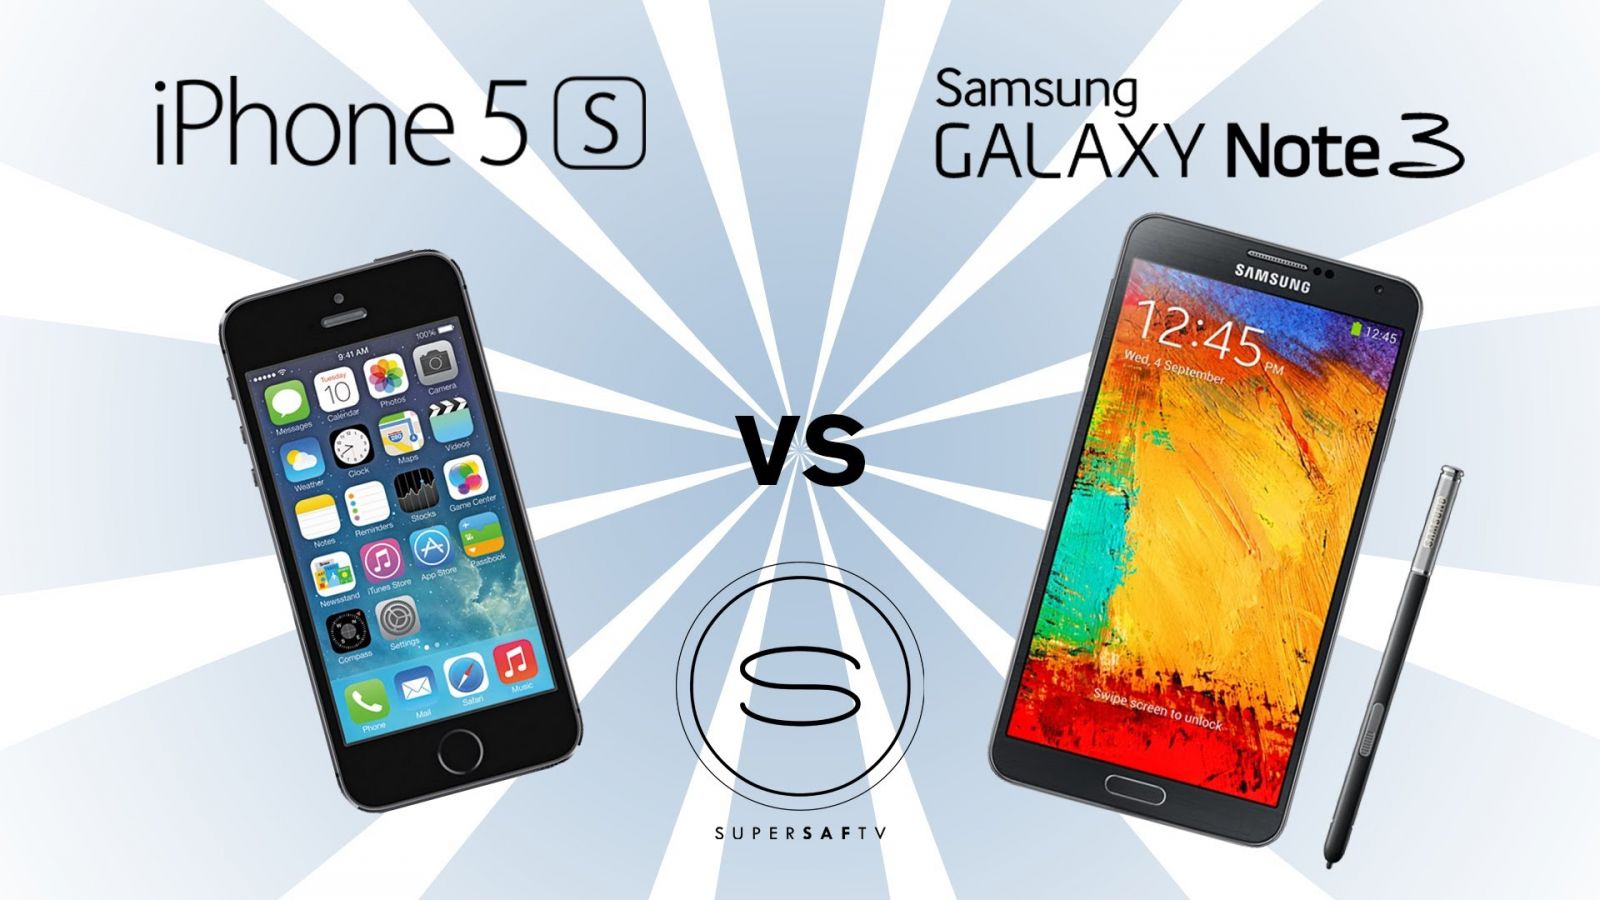 Apple's mega iPhone vs Samsung's Note 3: Phablet-sized battle brewing